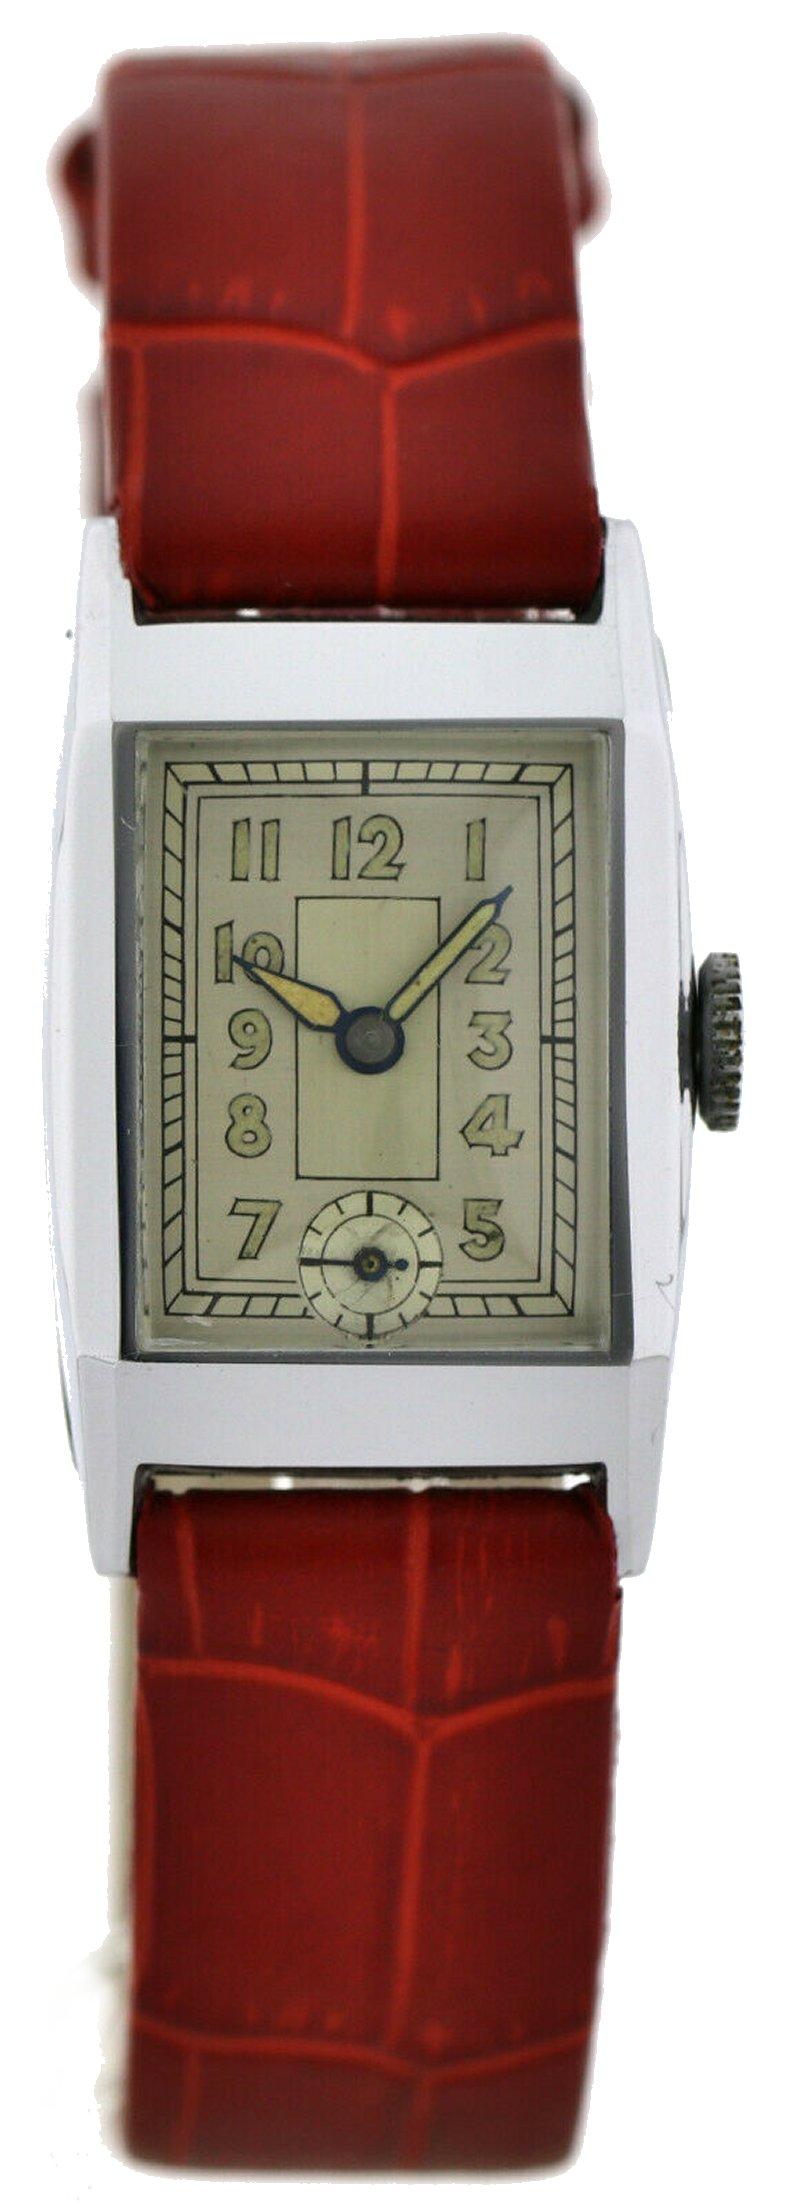 Art Deco Gents Chrome Wristwatch Old Stock, Never Worn, Newly Serviced, 1930 5